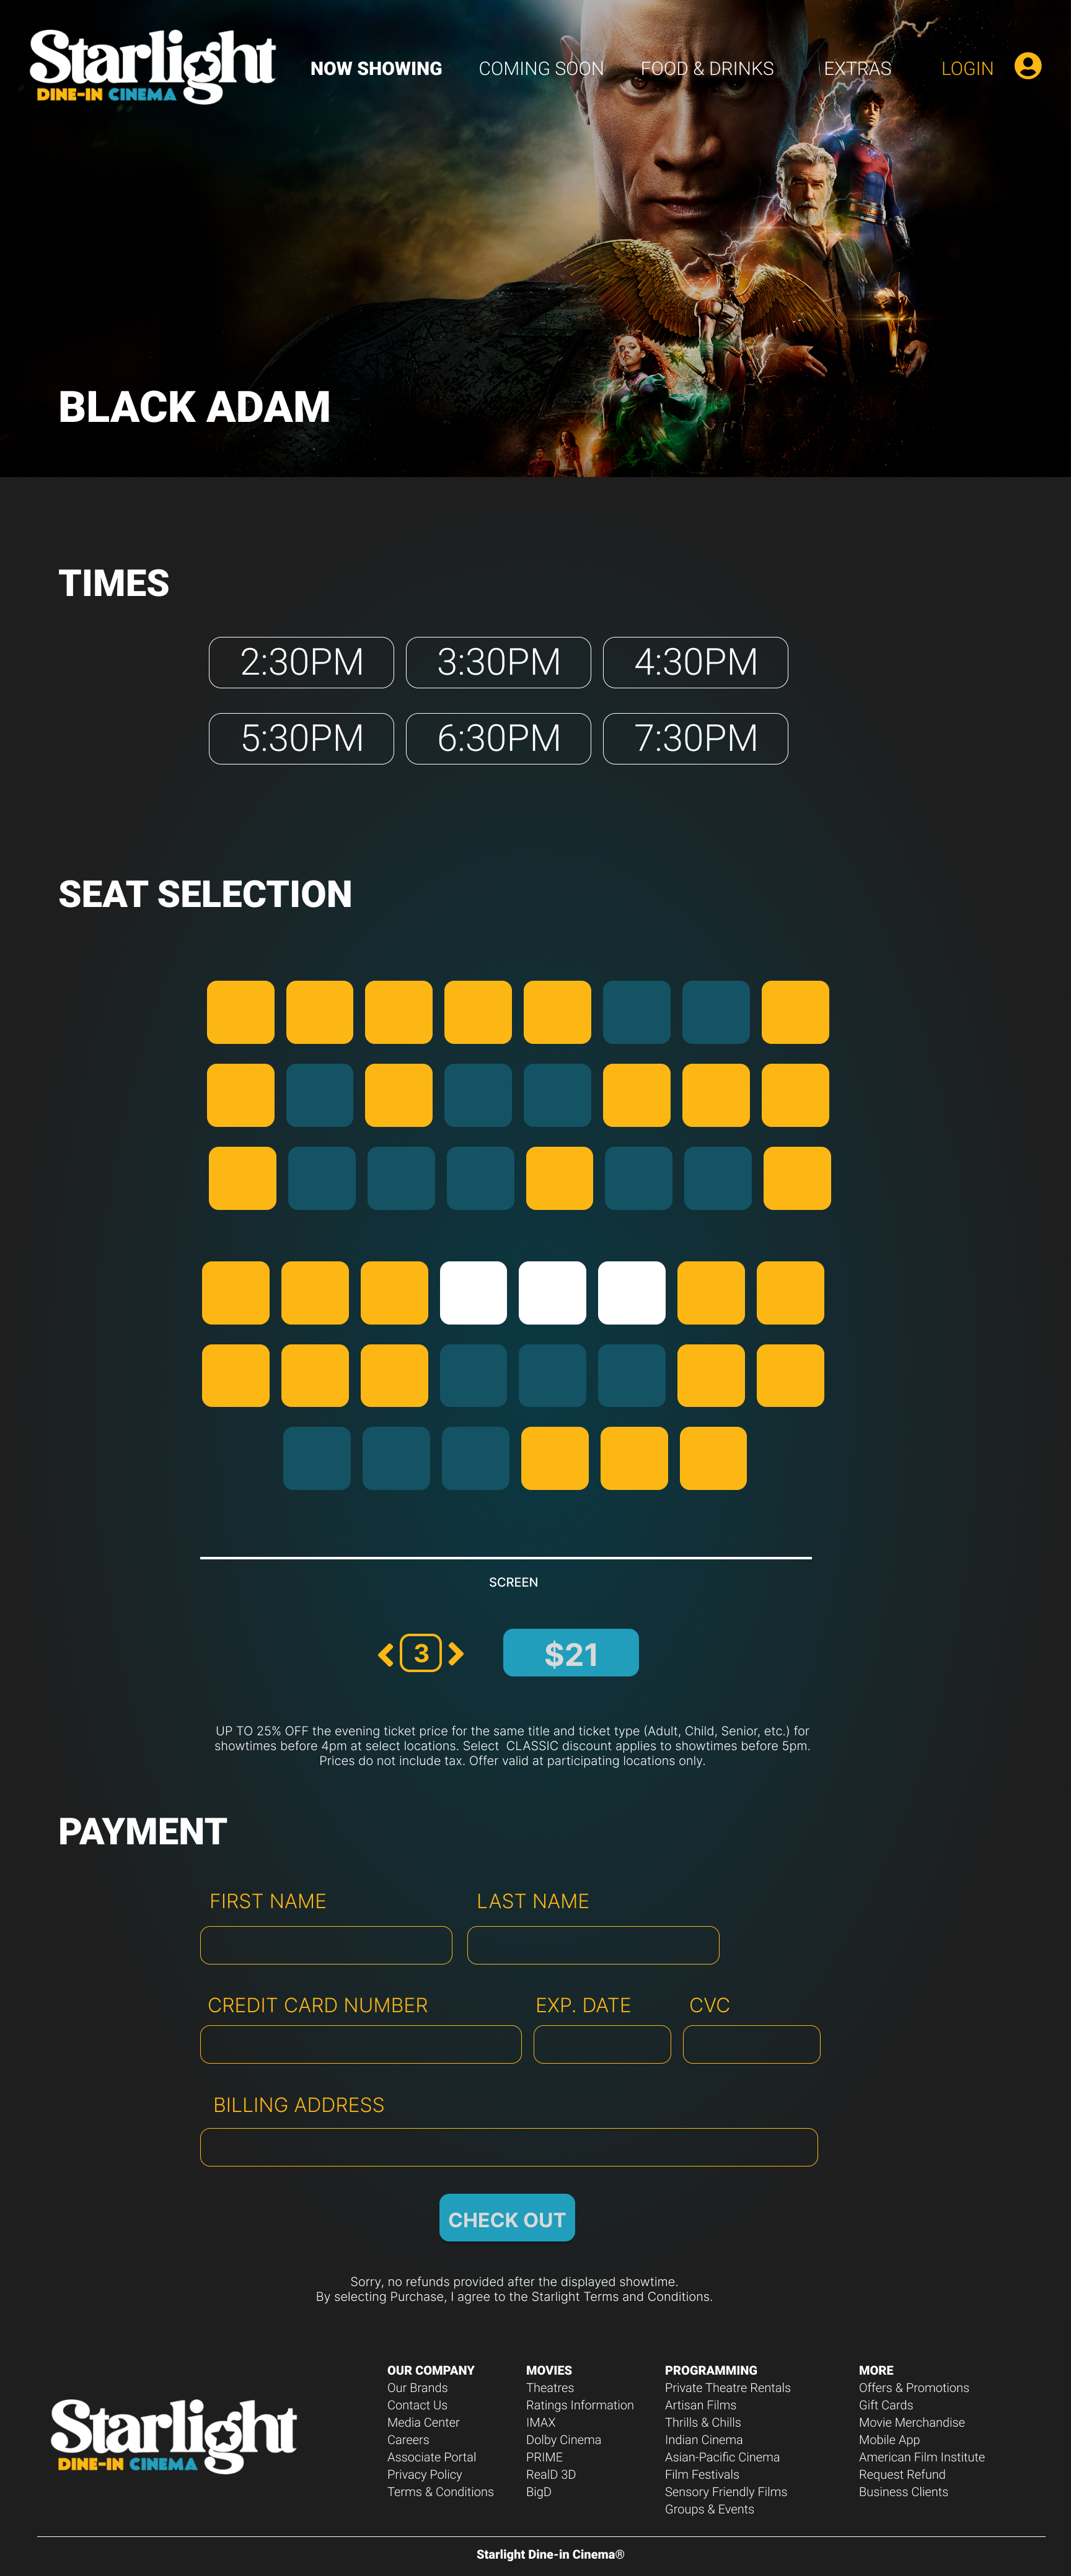 seat selection